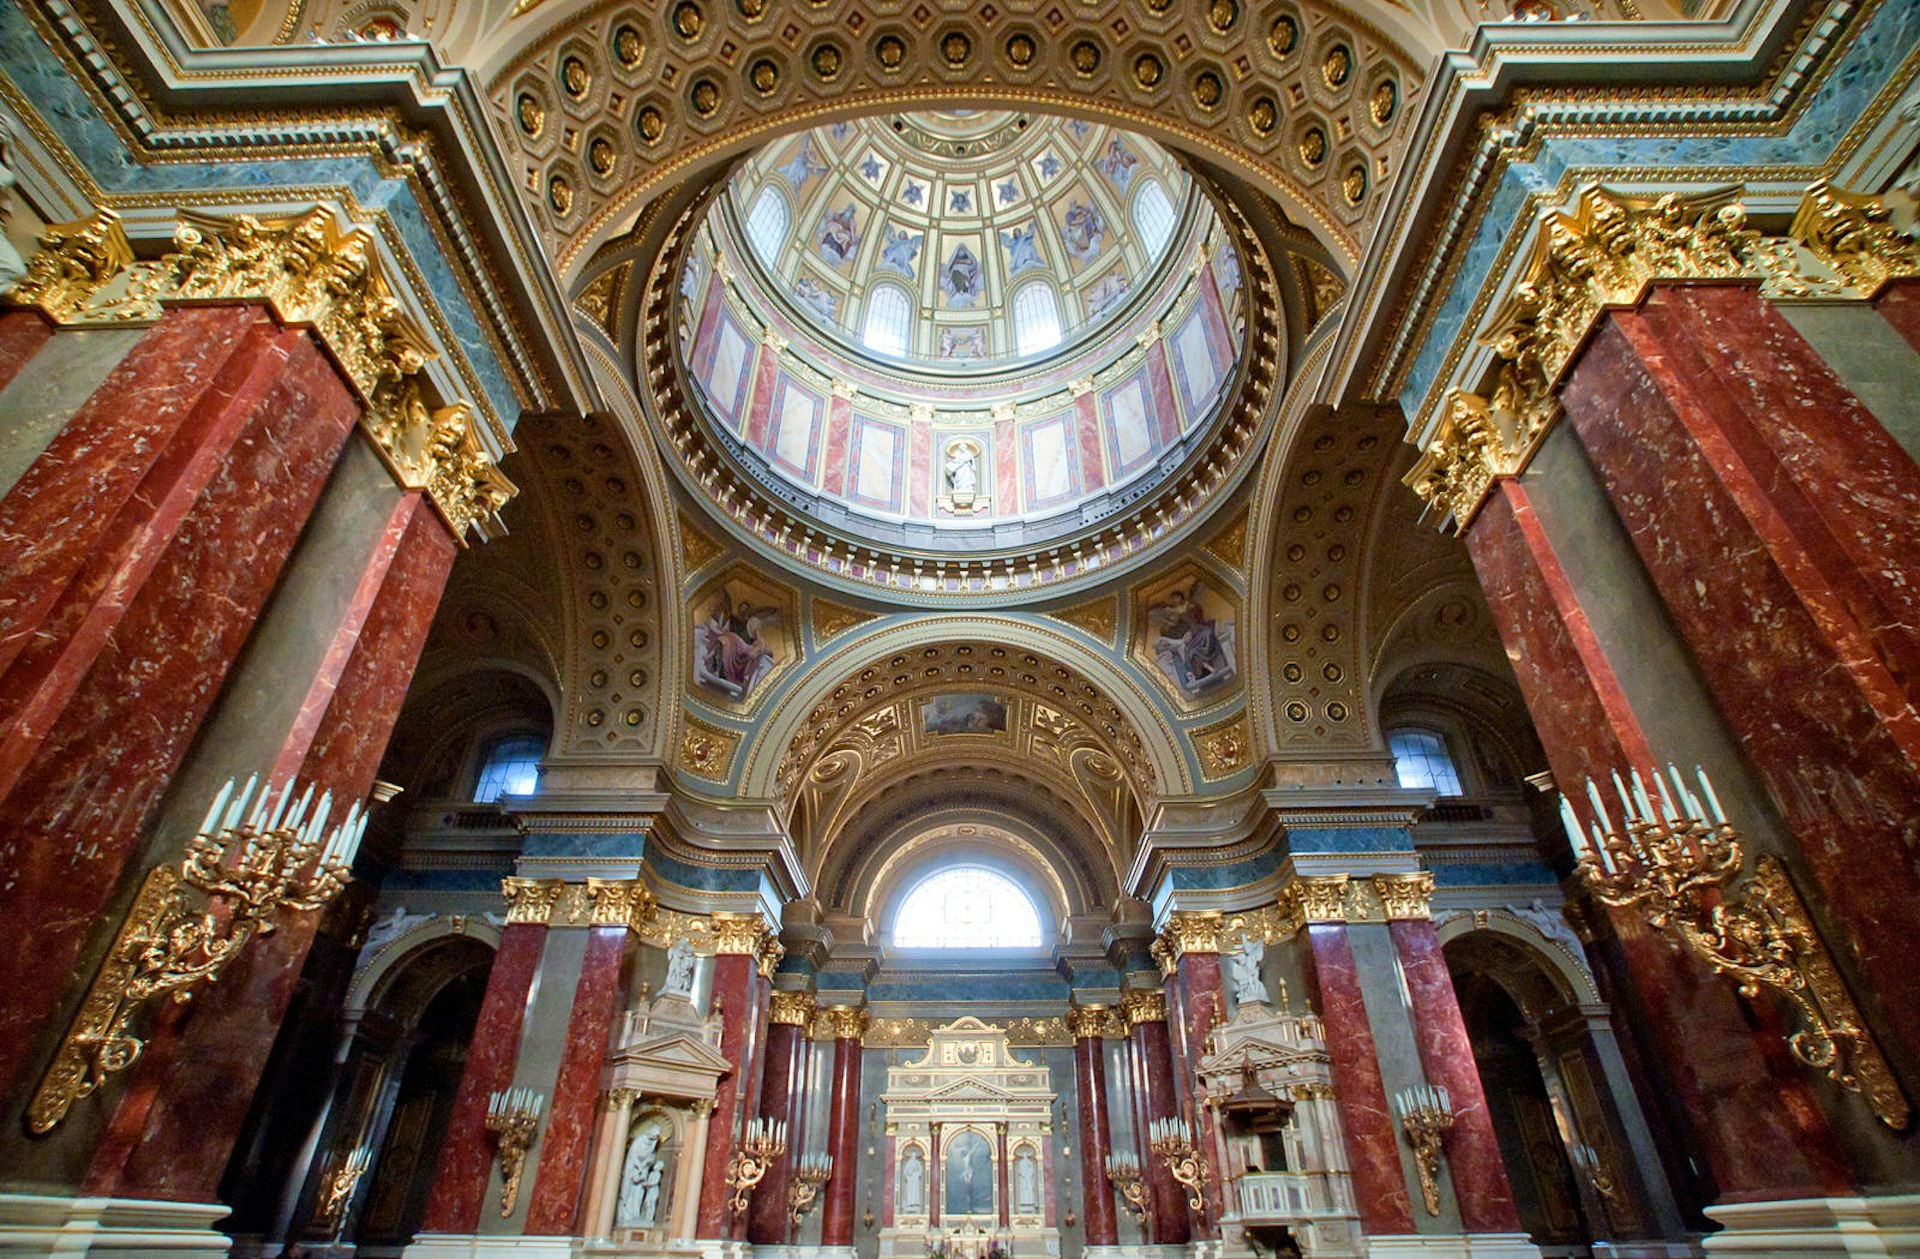 The ornate interior of the Basilica of St. Stephen, with red walls, a large dome and gold altar